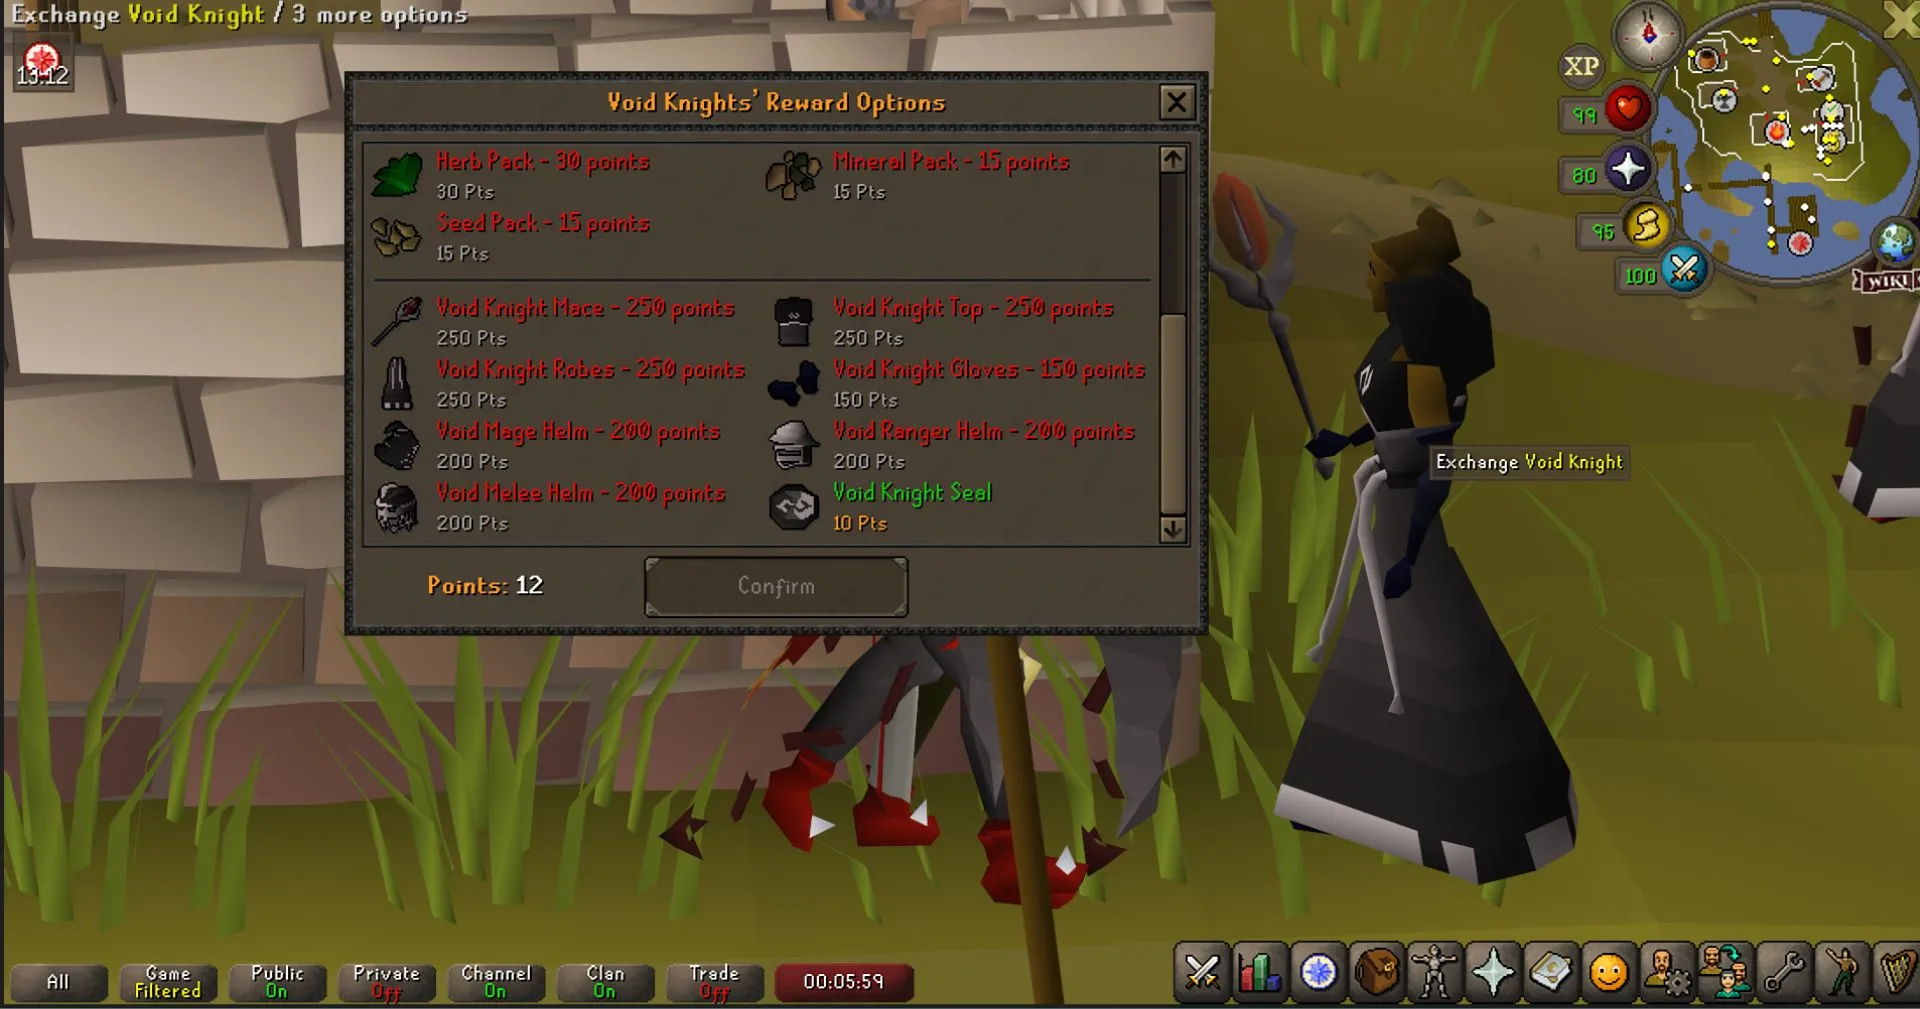 OSRS player viewing the Pest Control Rewards Shop.